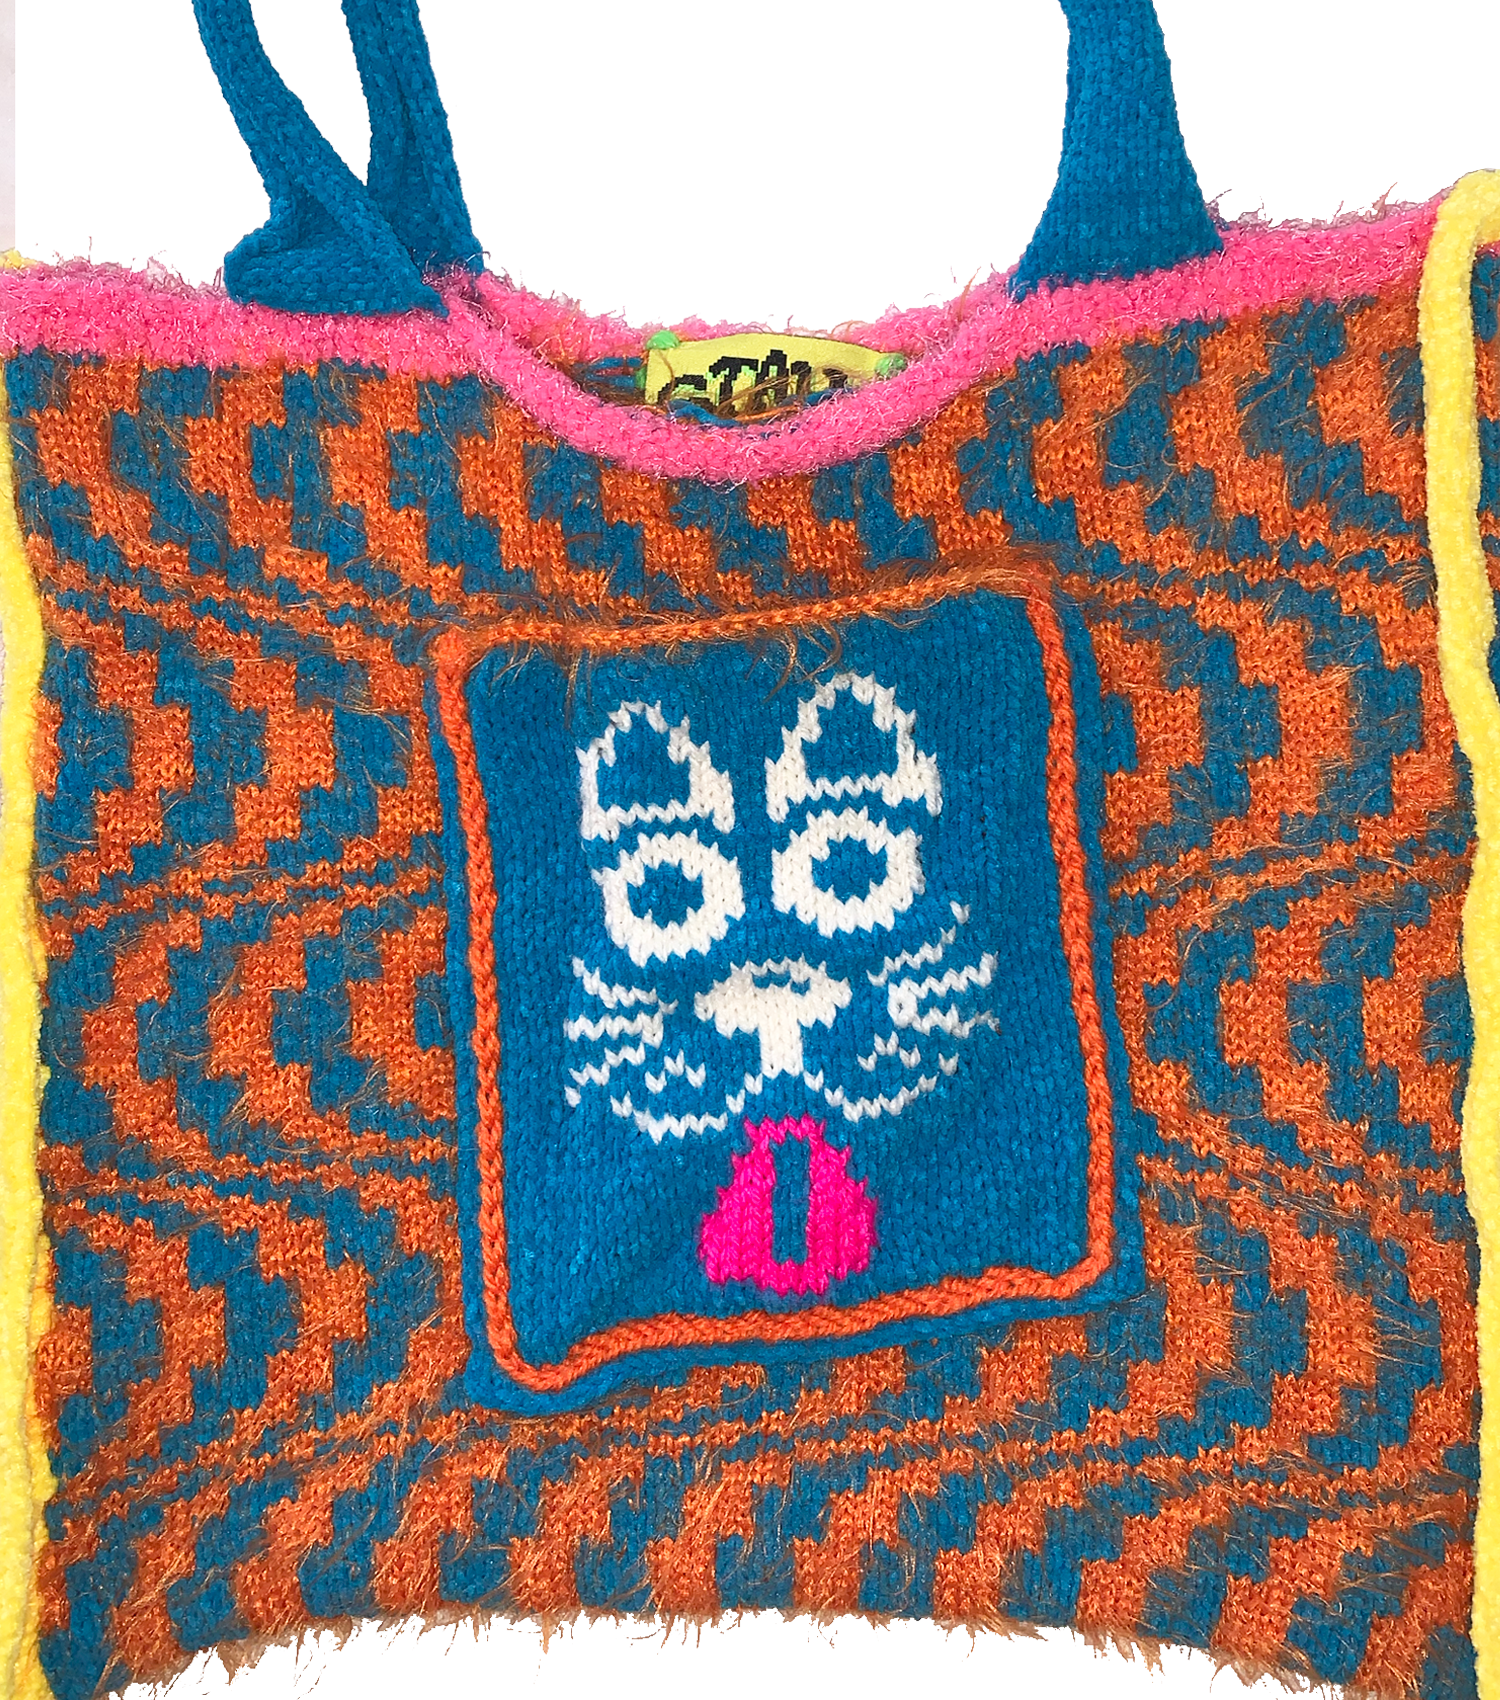 Kathleen, kathleen los angeles, independent fashion, independent artist, independent designer, los angeles fashion, small business, handmade, handknit, knit machine, puppy tote, dog tote, fuzzy tote, crochet, embroidery, psychedelic print, square tote, stretch tote, animal tote, jessica stahl, stahl knit, one of a kind, one of a kind knit tote, orange tote, blue tote, pink tote